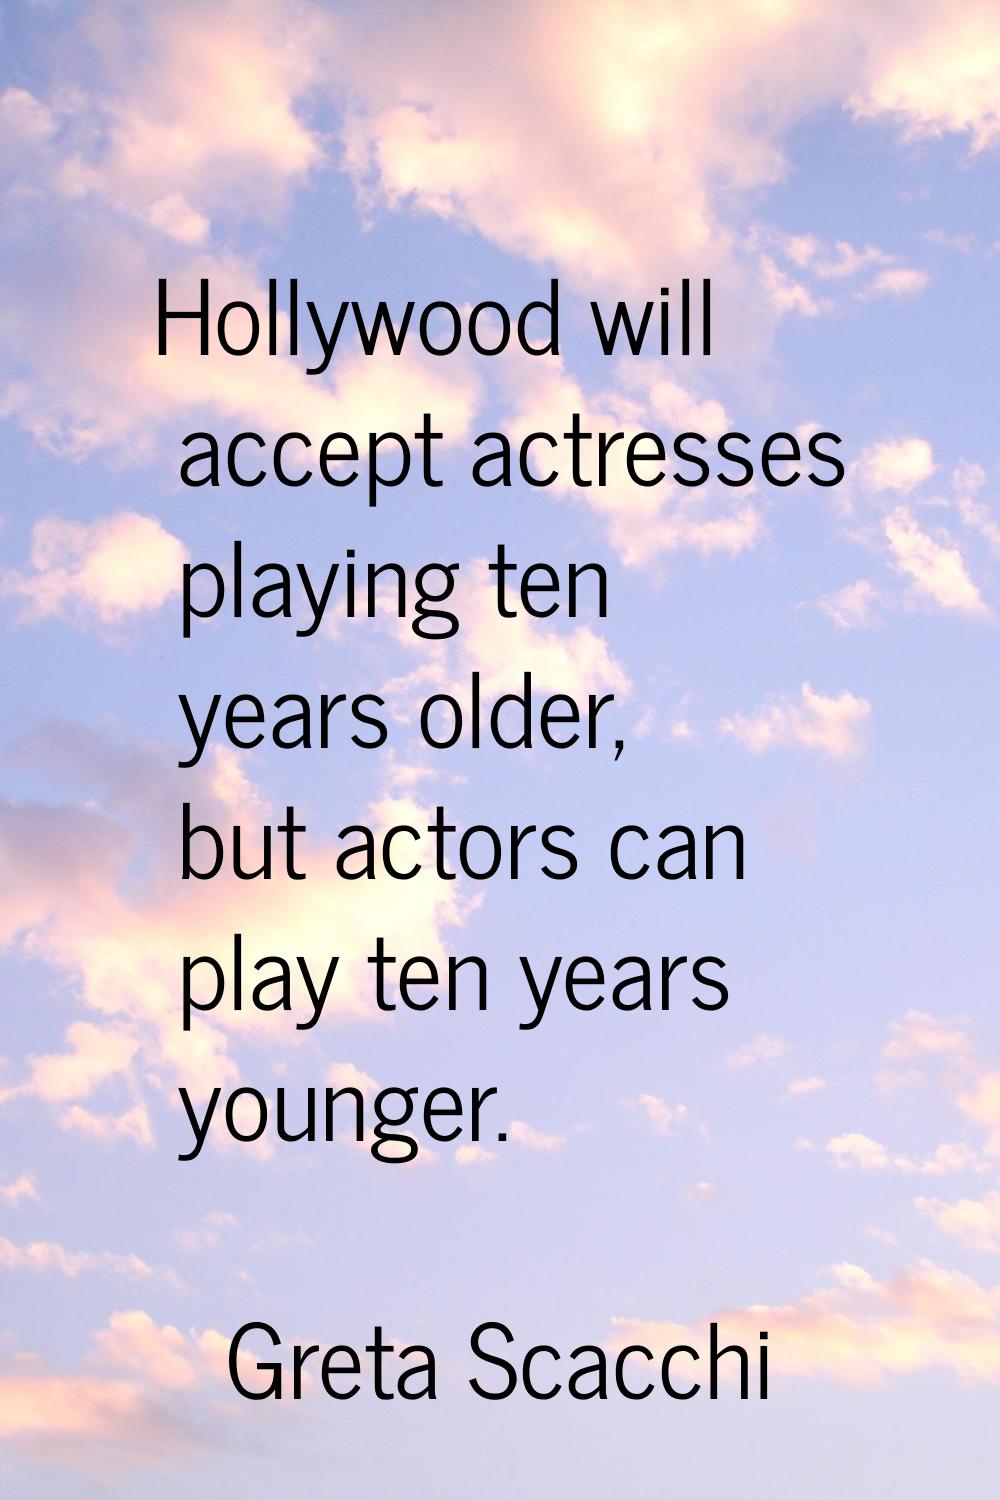 Hollywood will accept actresses playing ten years older, but actors can play ten years younger.